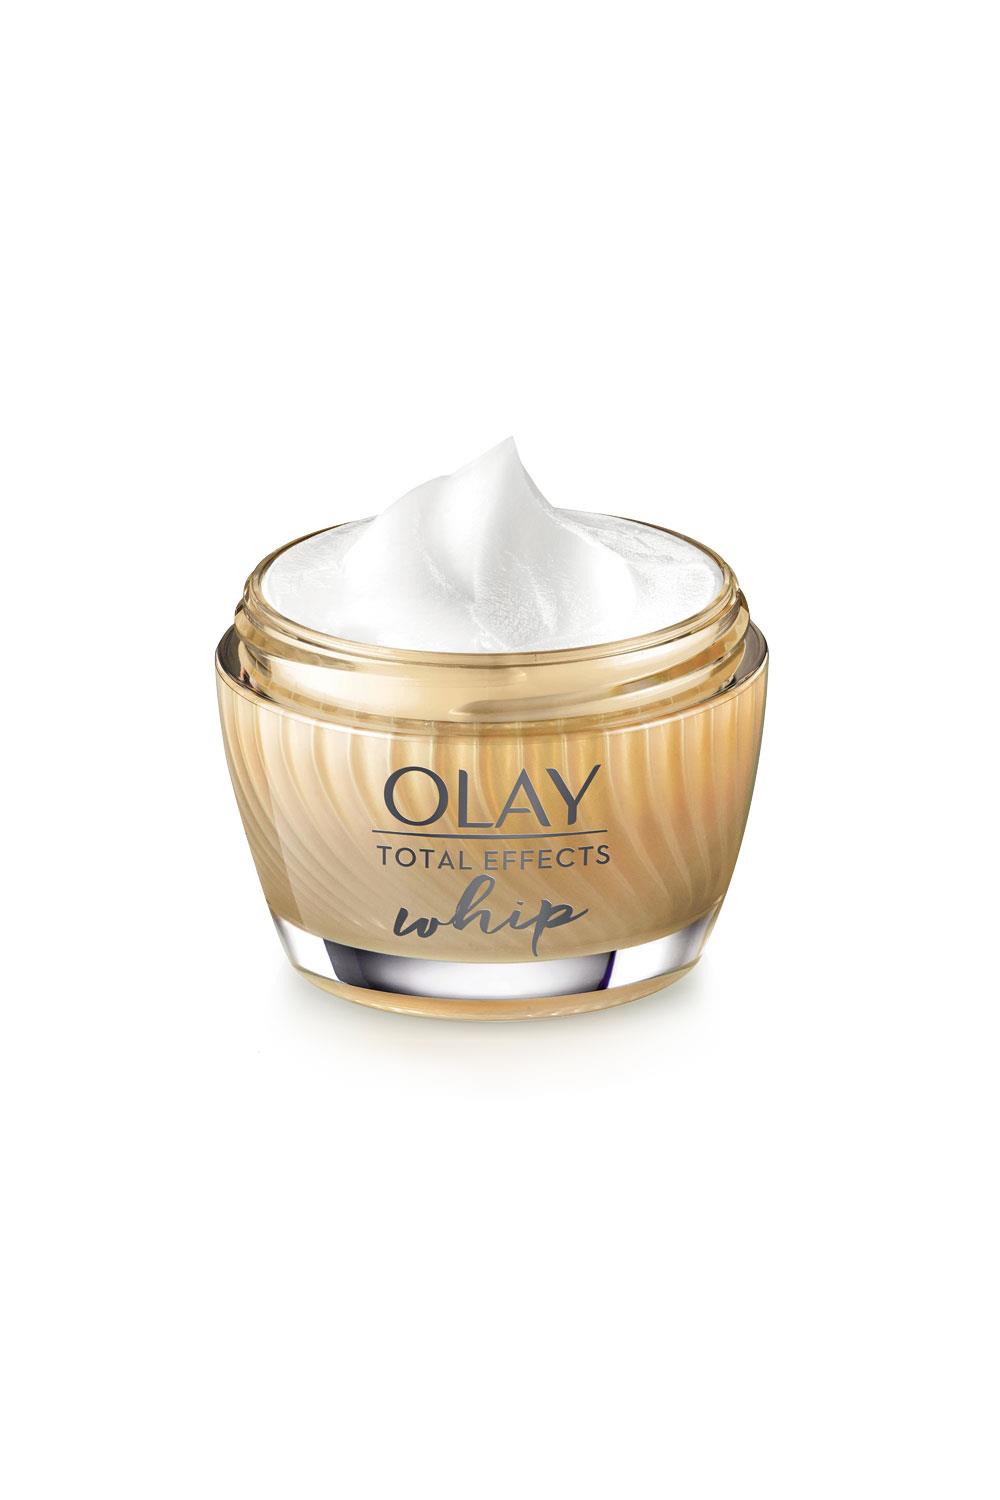 novedades antiedad Olay Total Effects Whip FPS 30, 39,99€